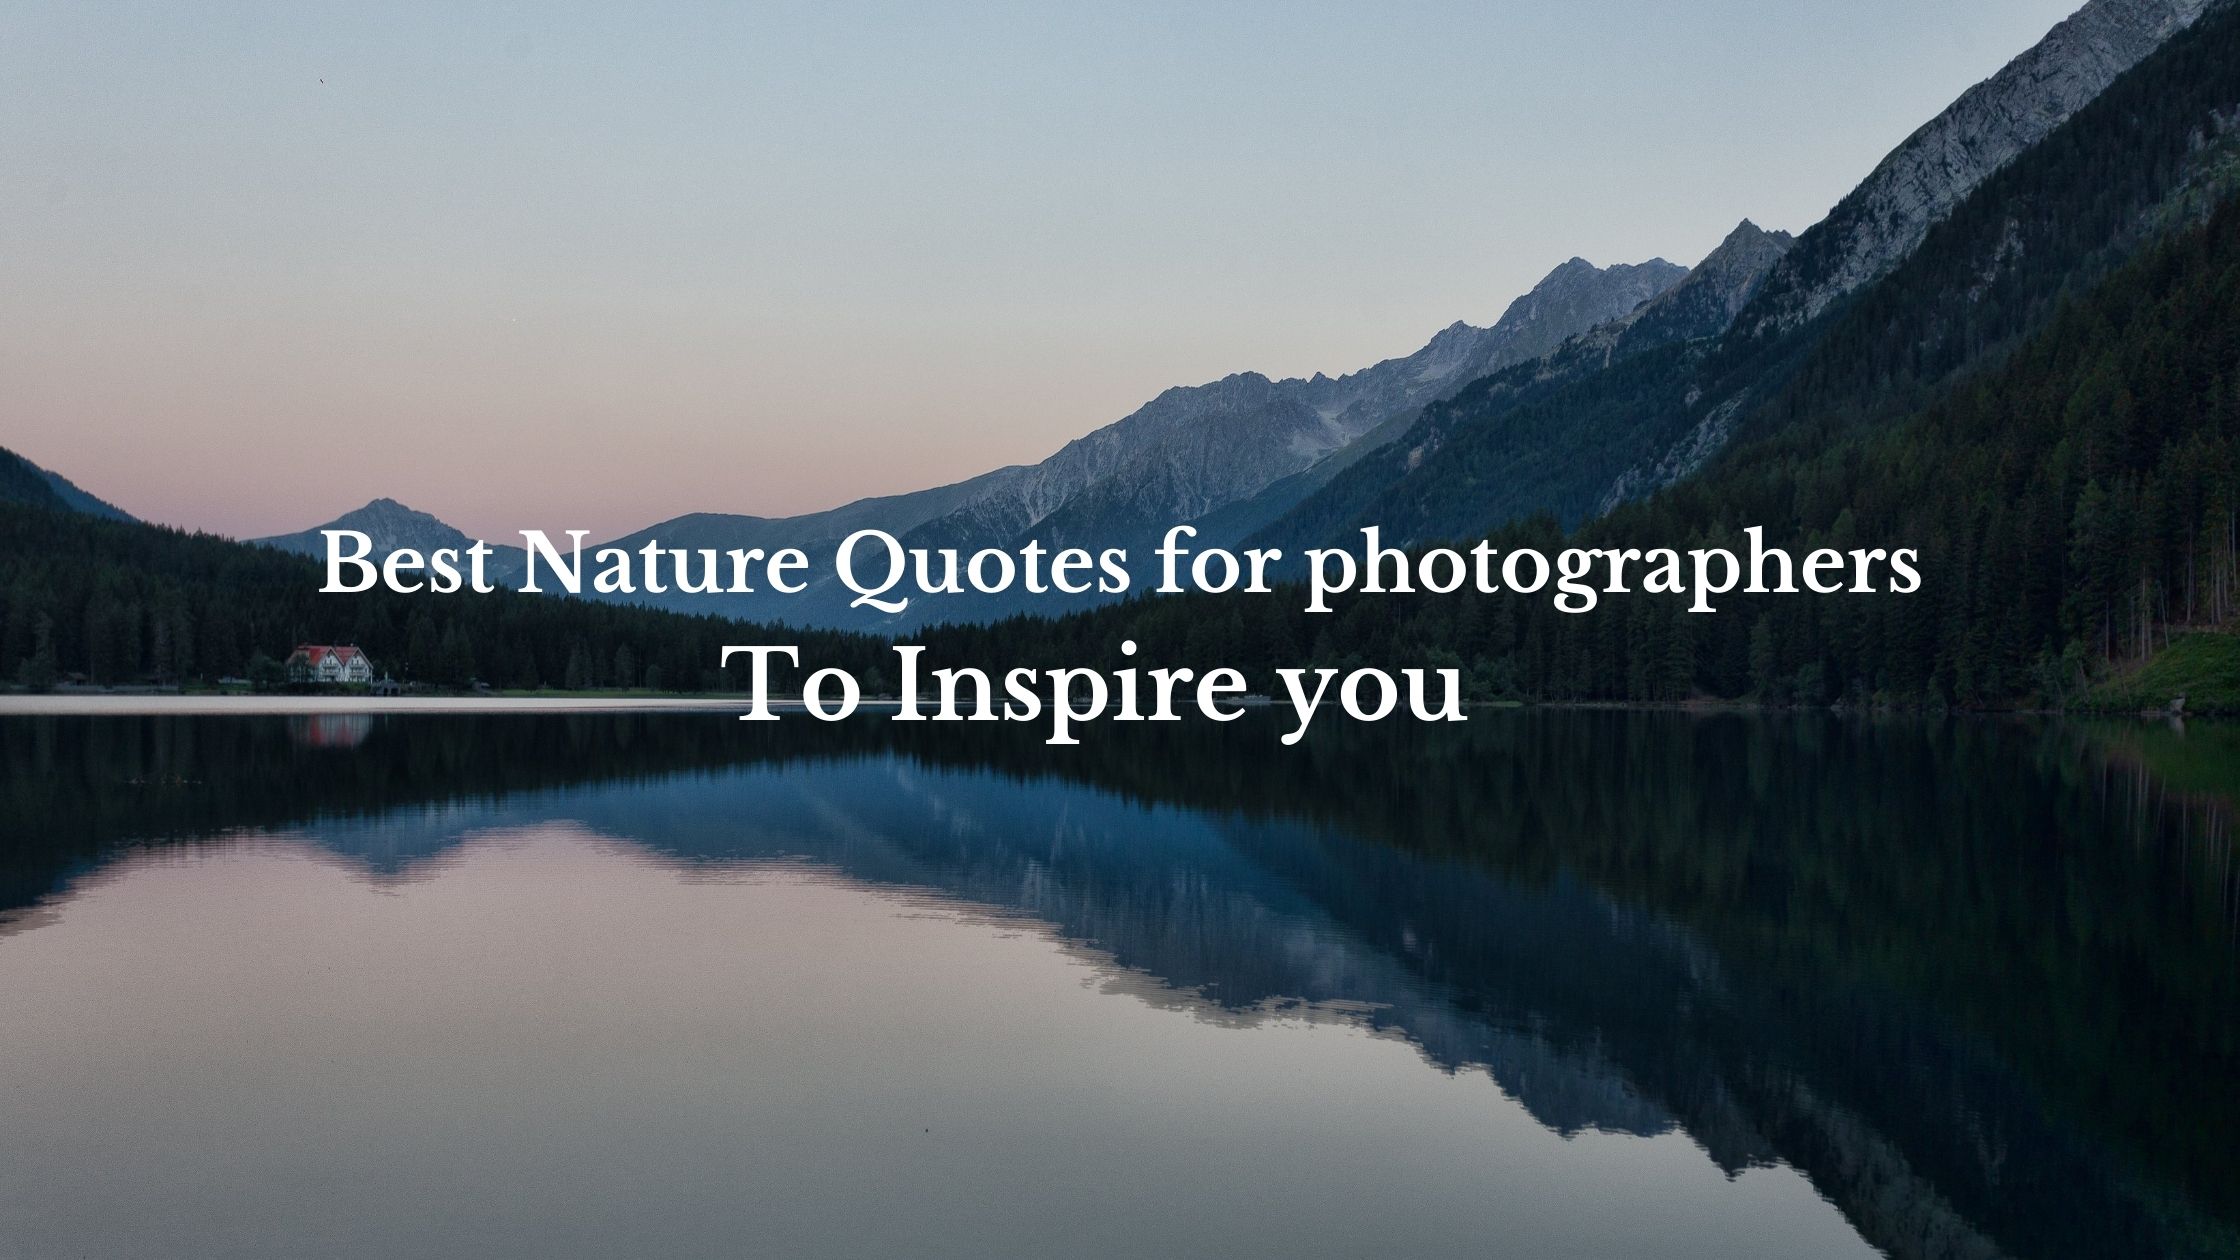 46 Quotes For Nature Photography To Inspire You Caption Cnublogs